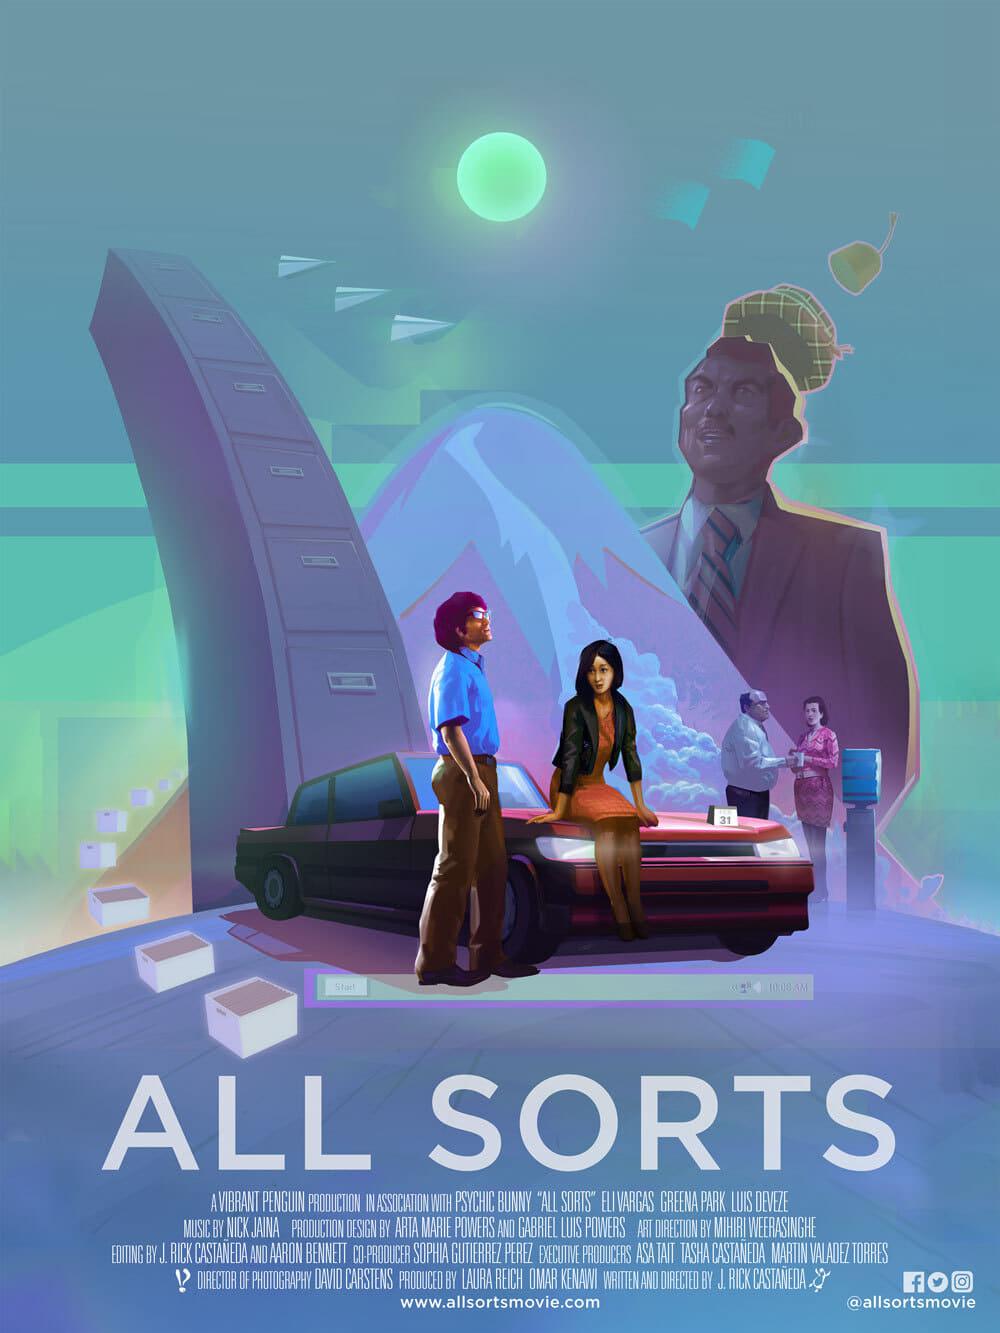 All Sorts poster